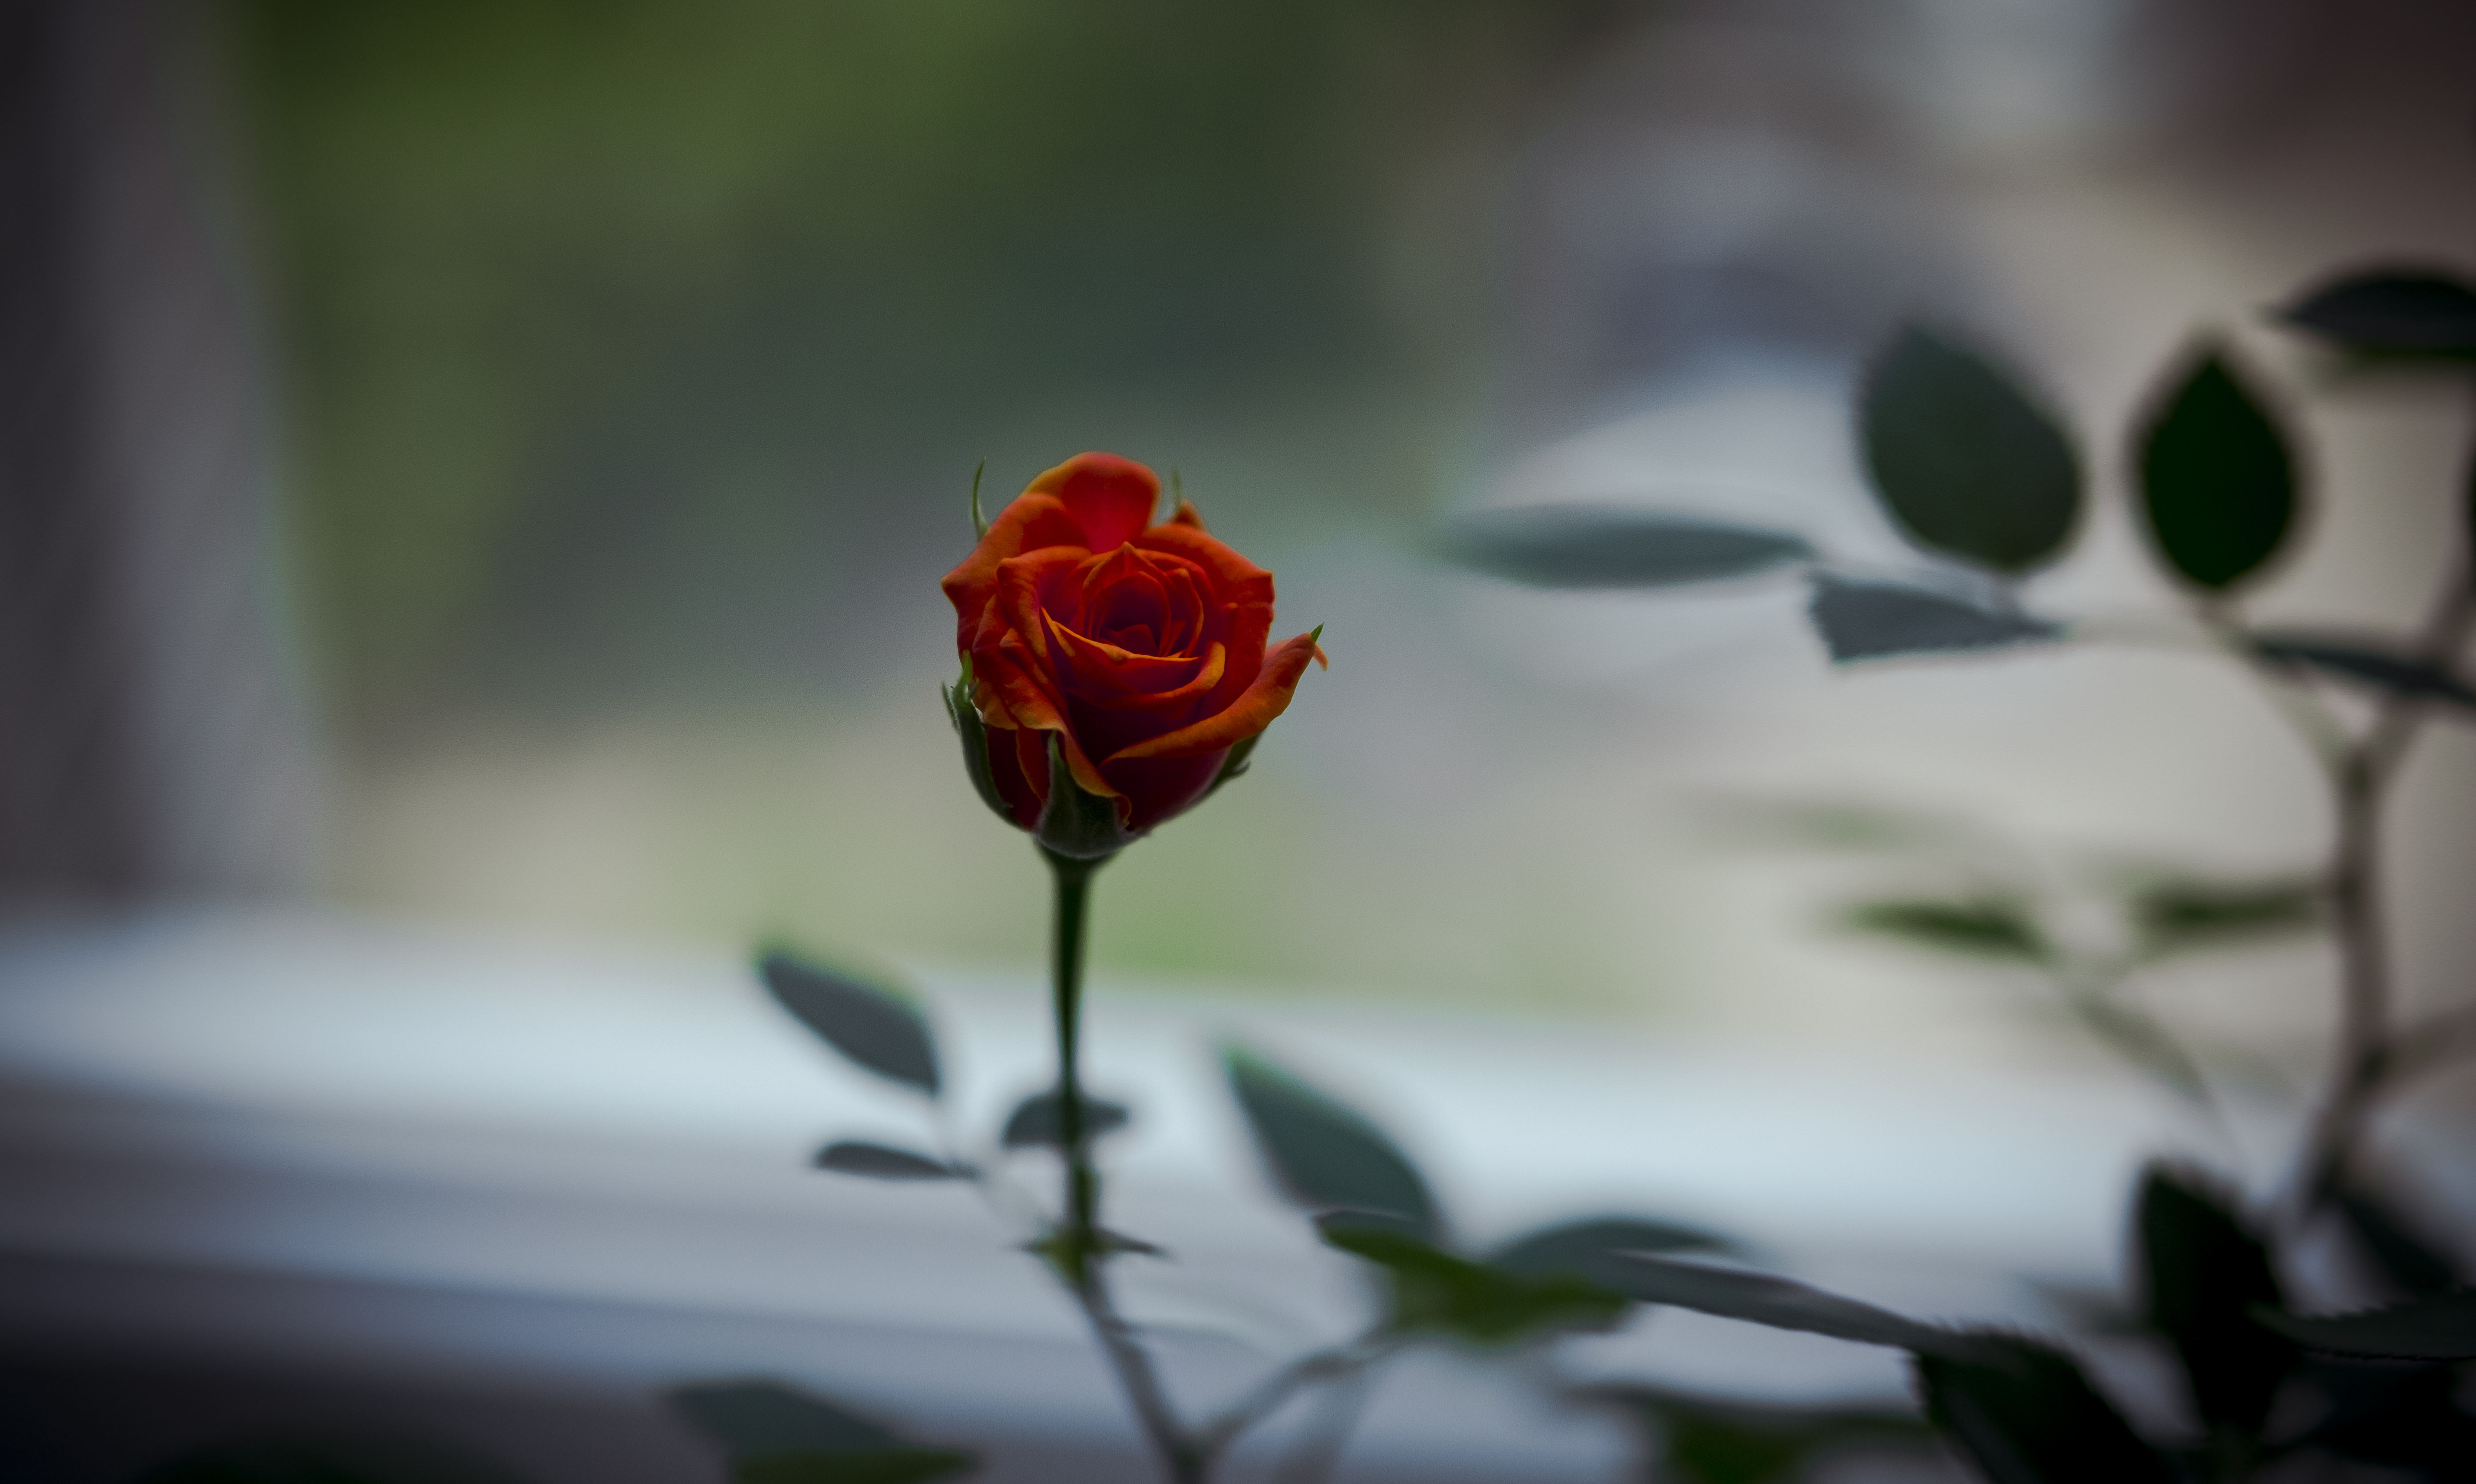 Flowers Leaves Rose Blurry Background Closeup Plants 5573x3341